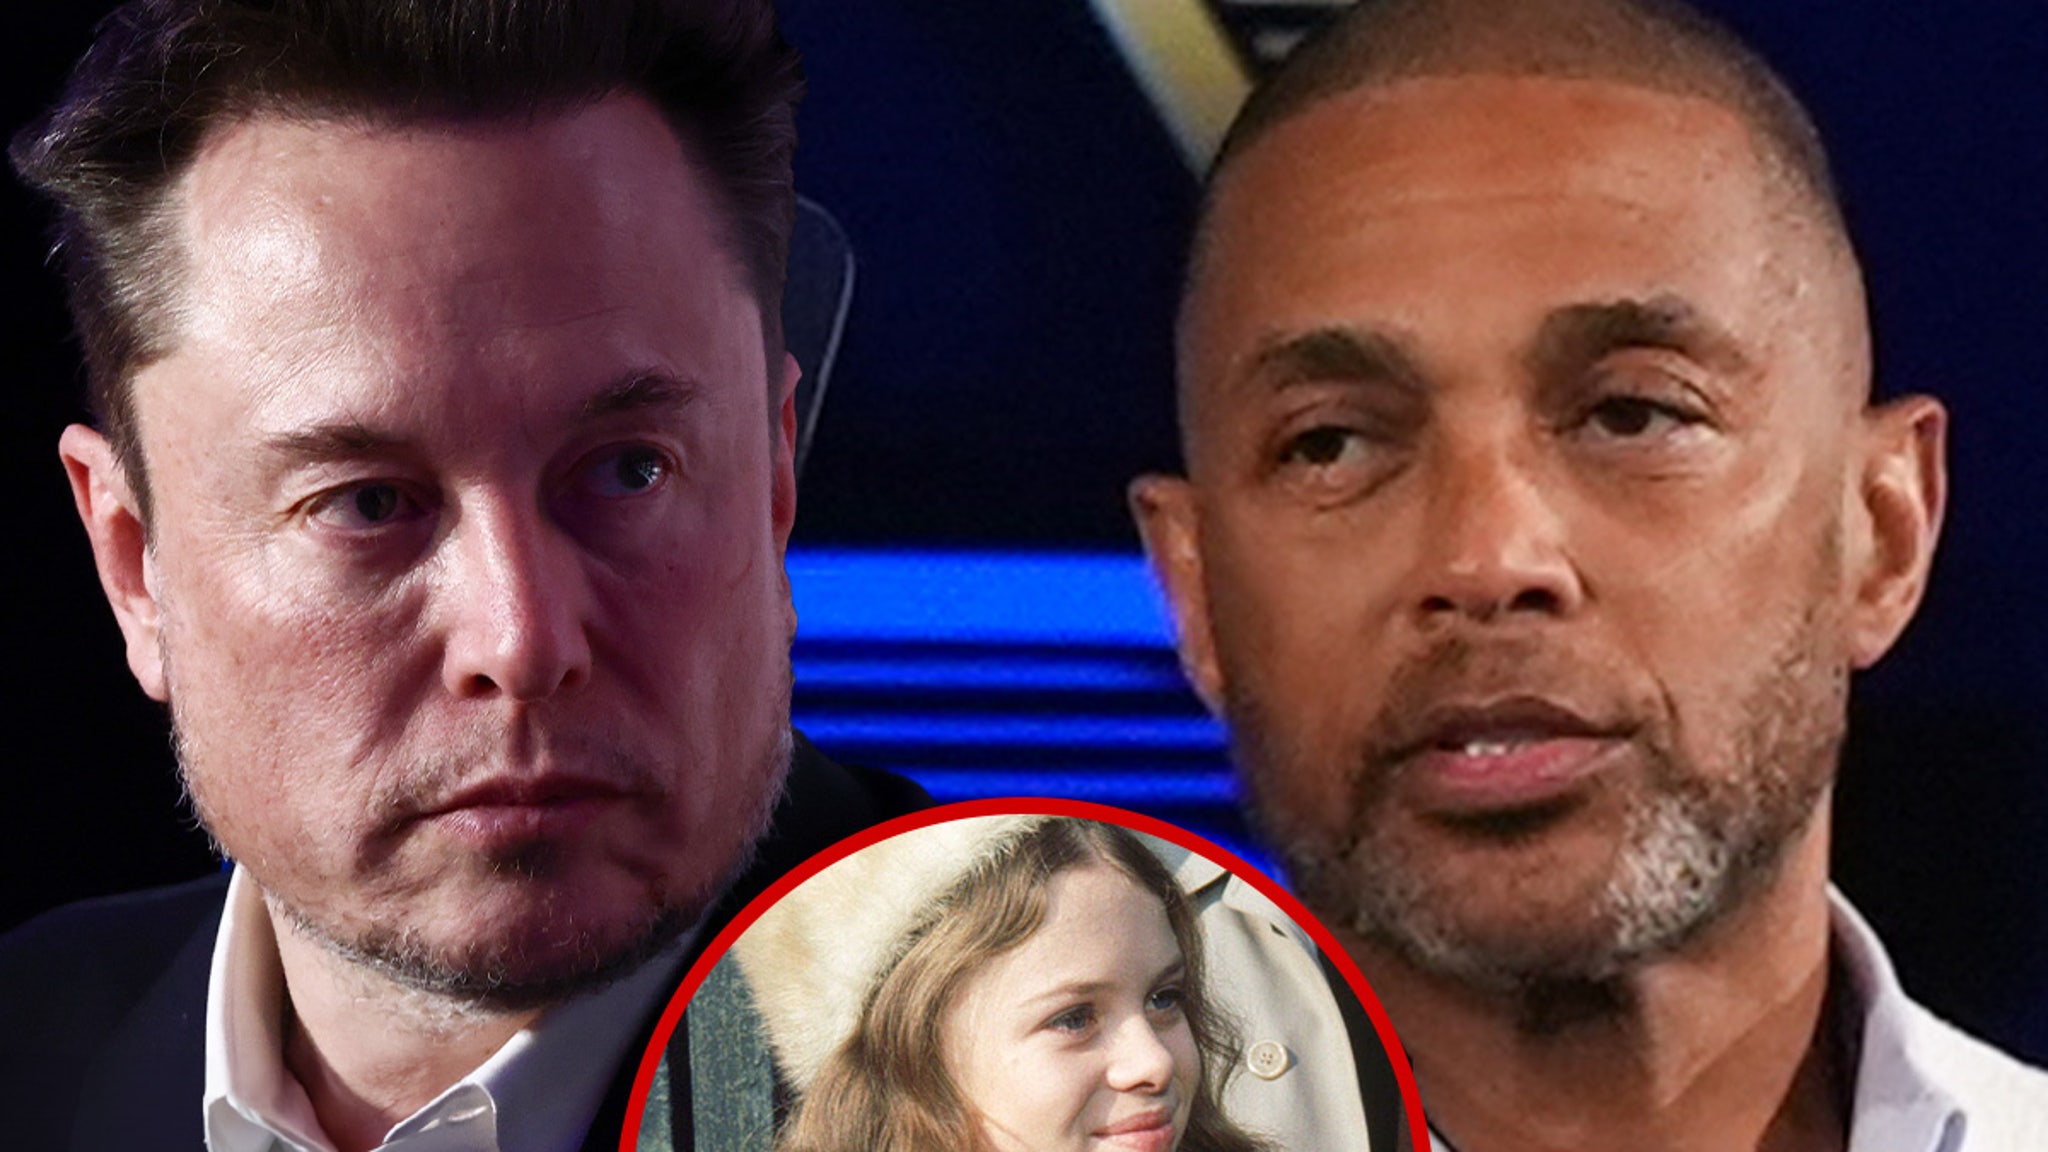 Elon Musk Compares Don Lemon to Spoiled Child From ‘Willy Wonka’